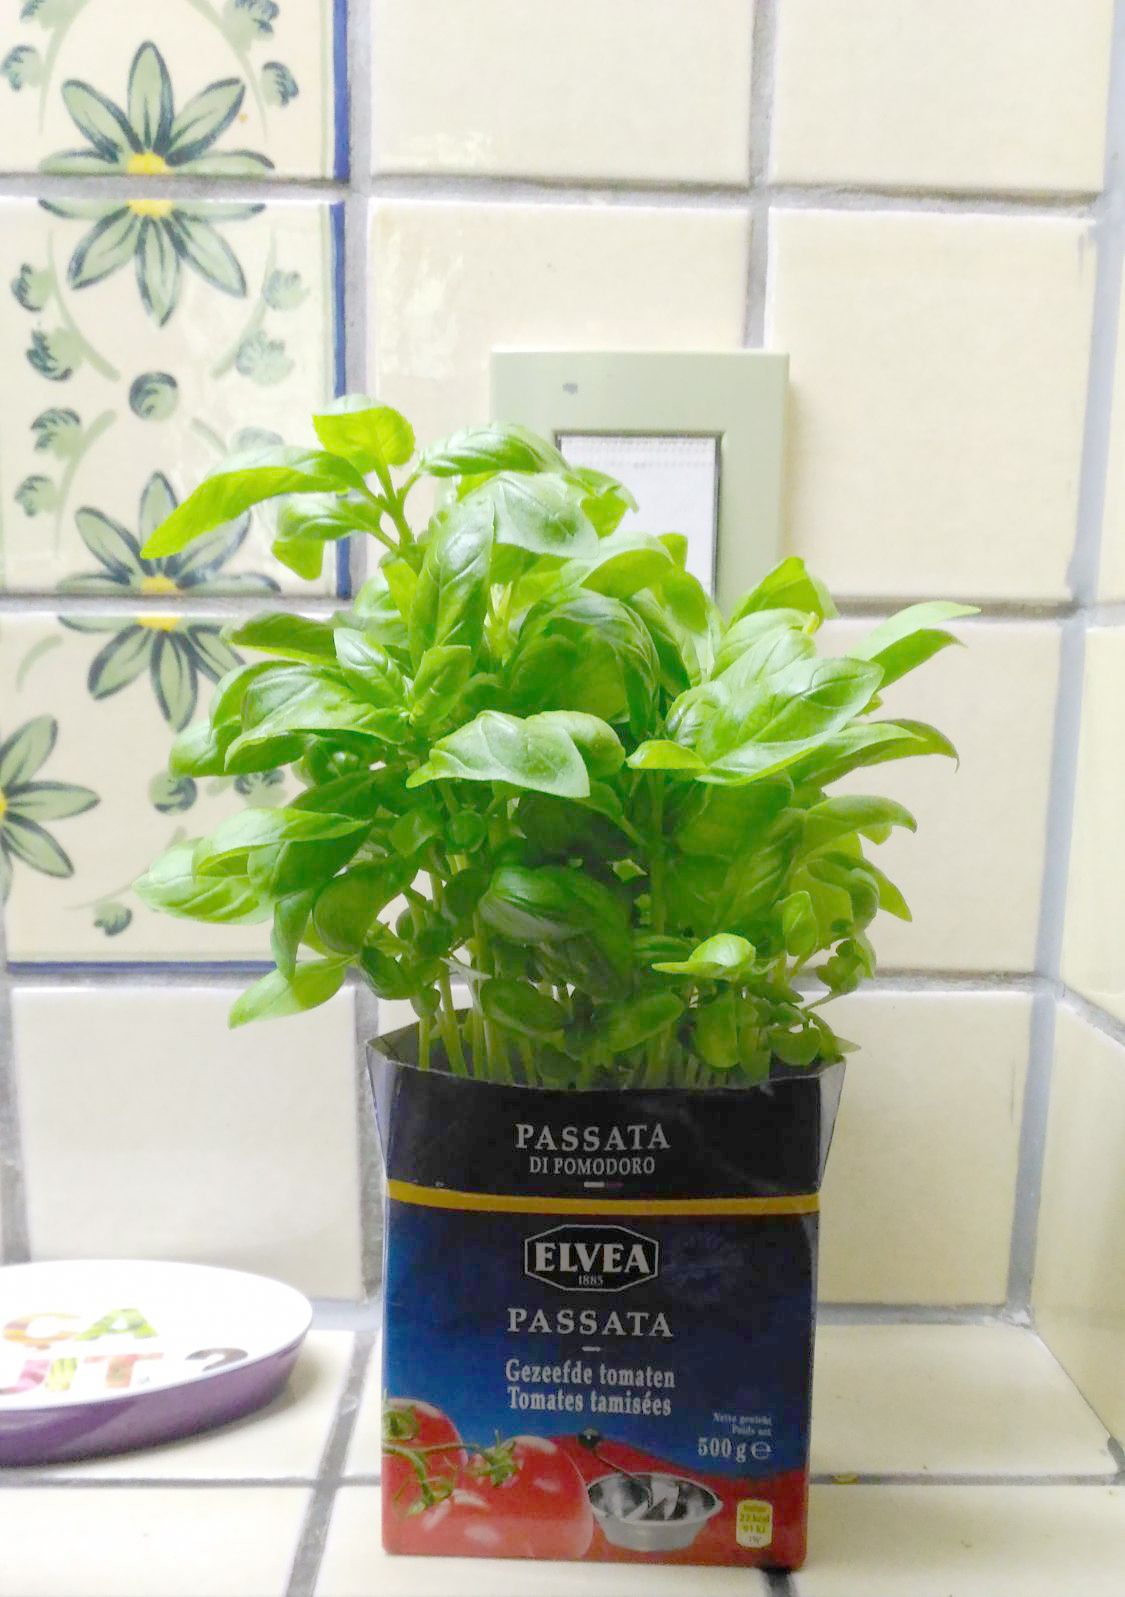 The ideal plant pot for my basil